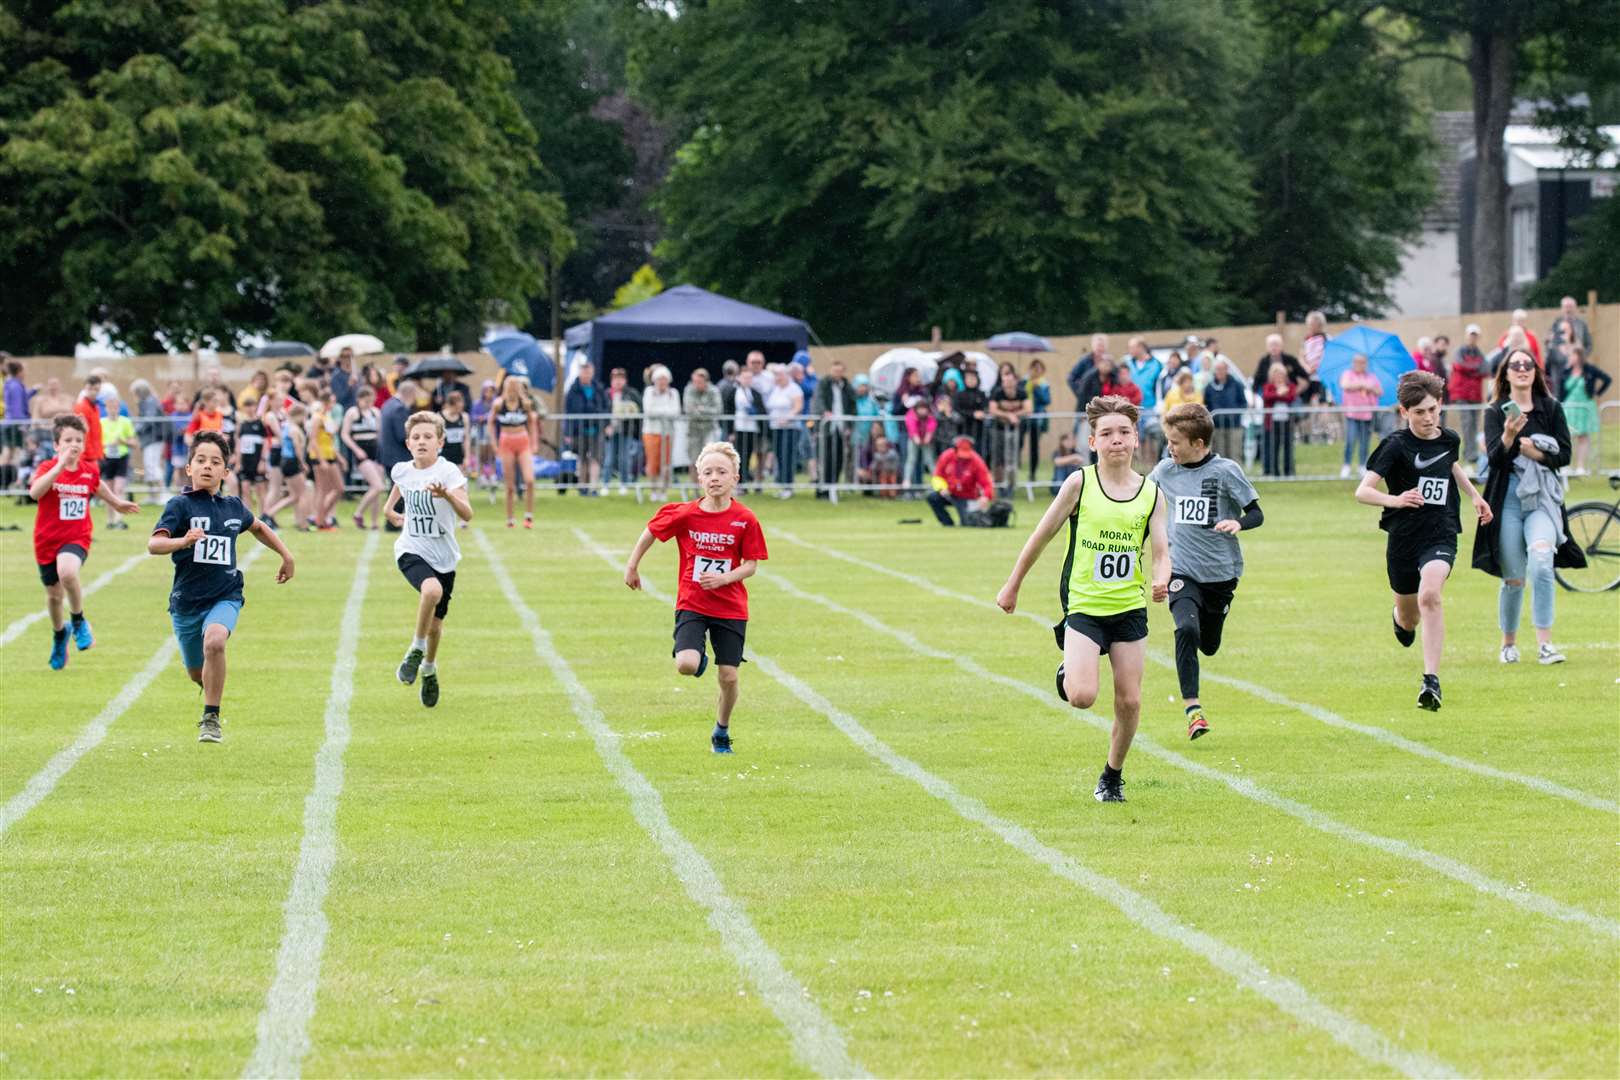 Boys 11-13's 100 meter race was won by #60 Finn Carruthers from Moray Road Runners...Forres Highland Games 2022...Picture: Daniel Forsyth..